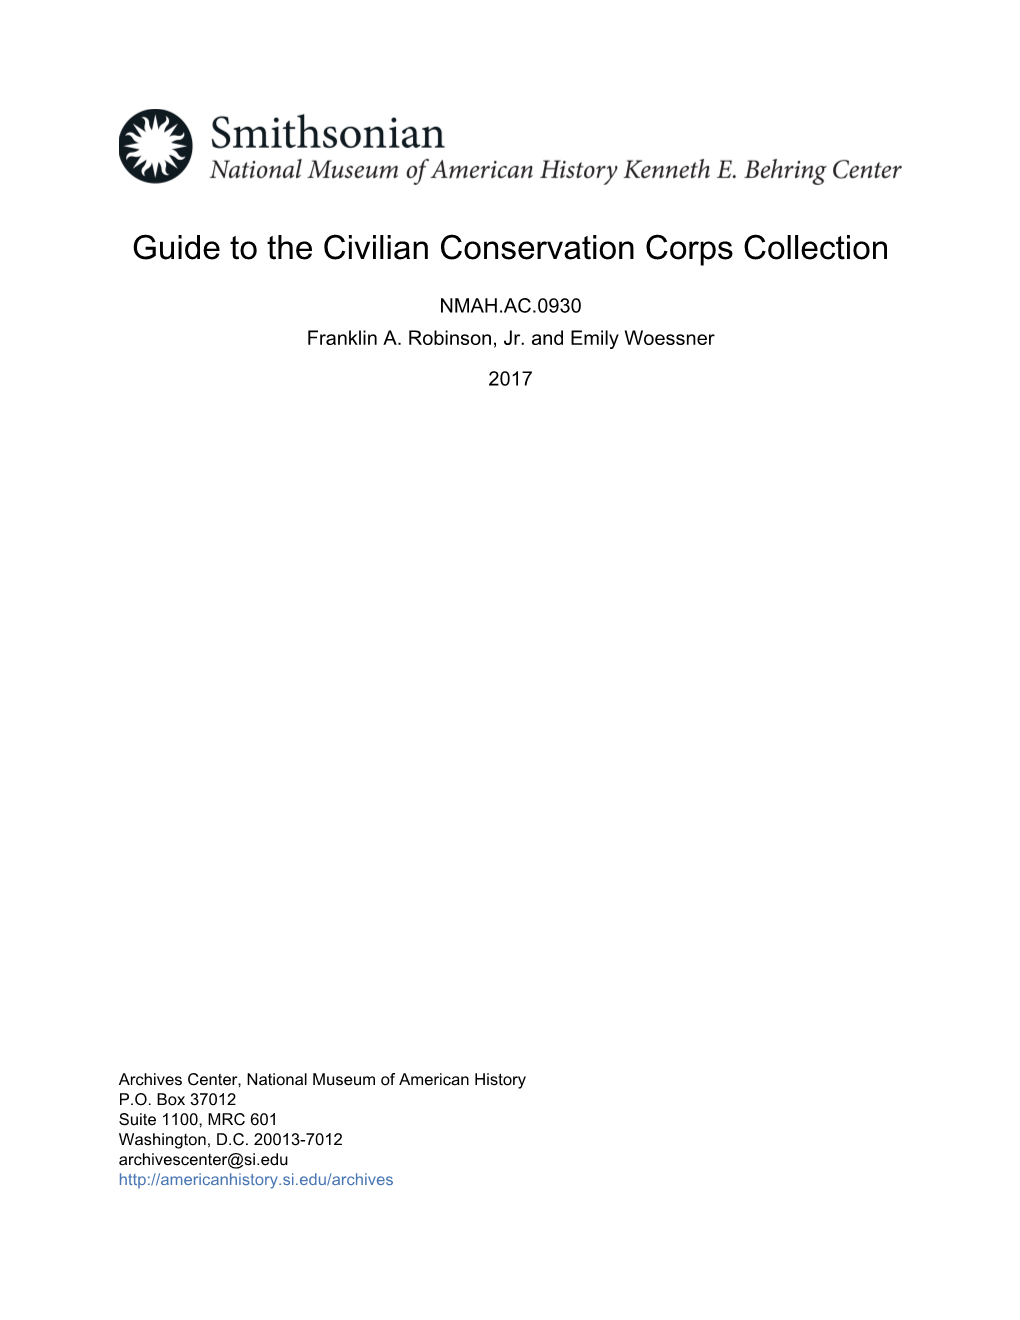 Guide to the Civilian Conservation Corps Collection